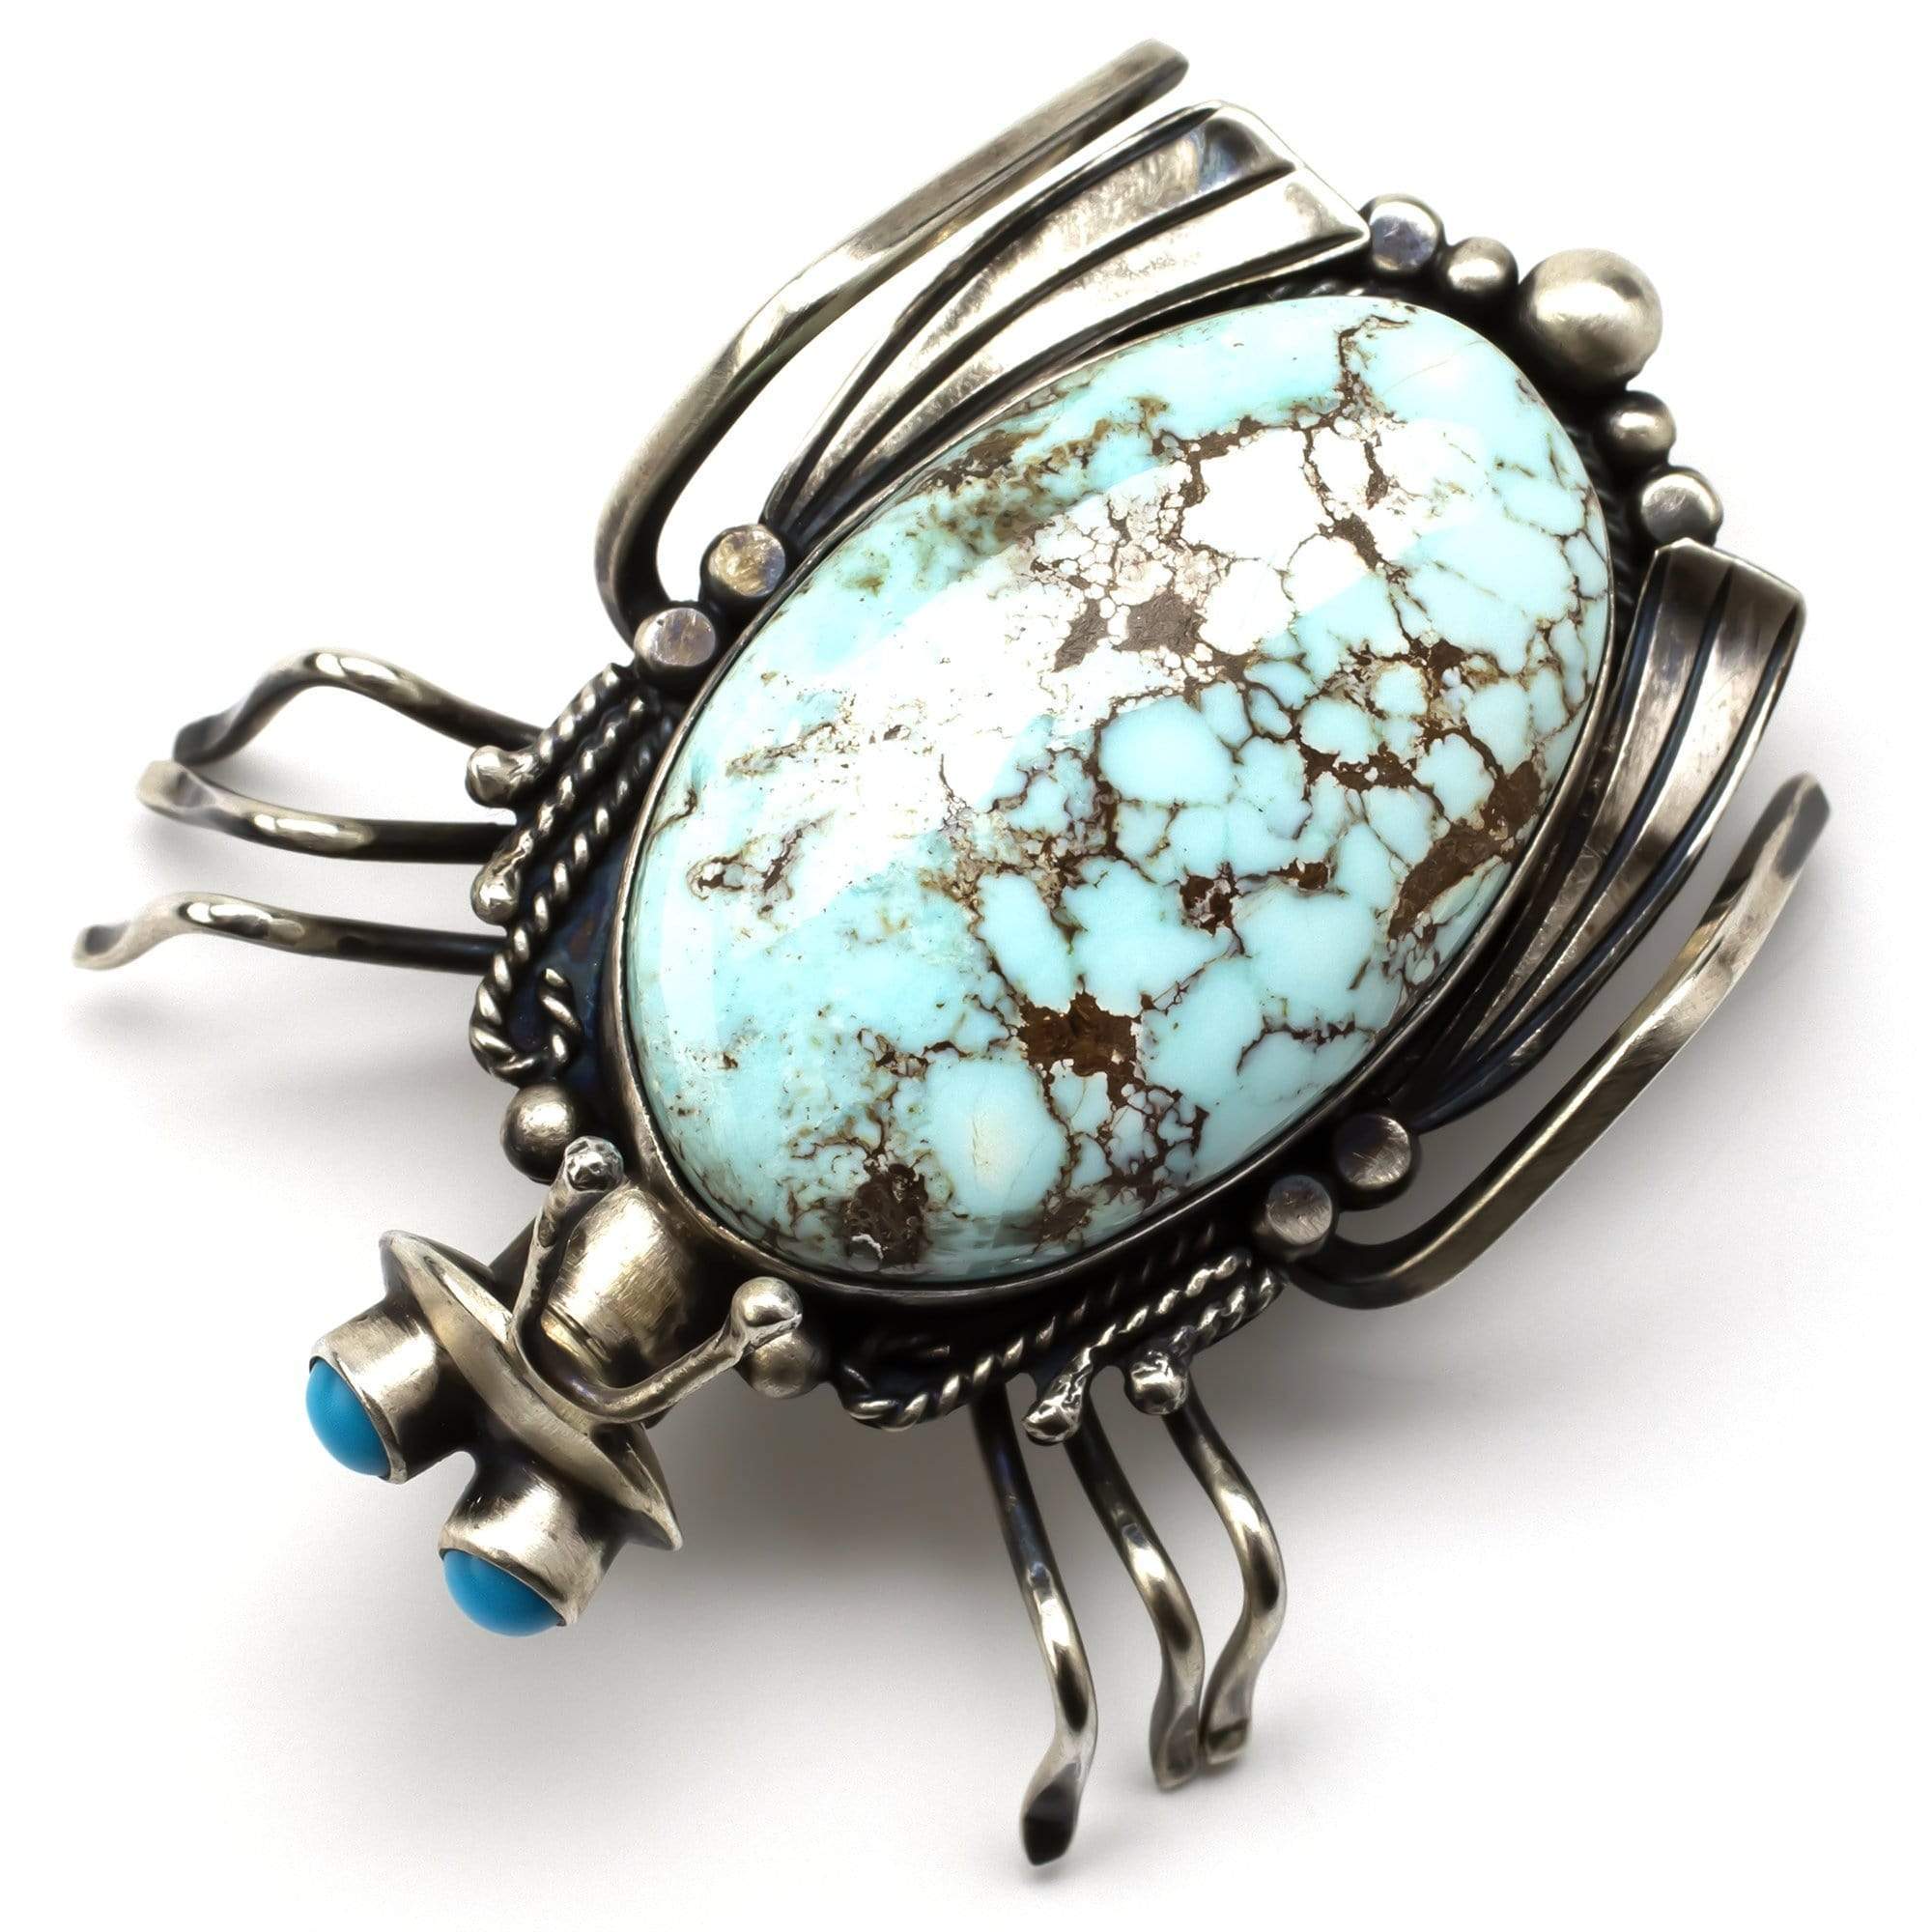 Kalifano Native American Jewelry White Carico Lake Turquoise USA Native American Made 925 Sterling Silver Bug Pin NAP1900.001